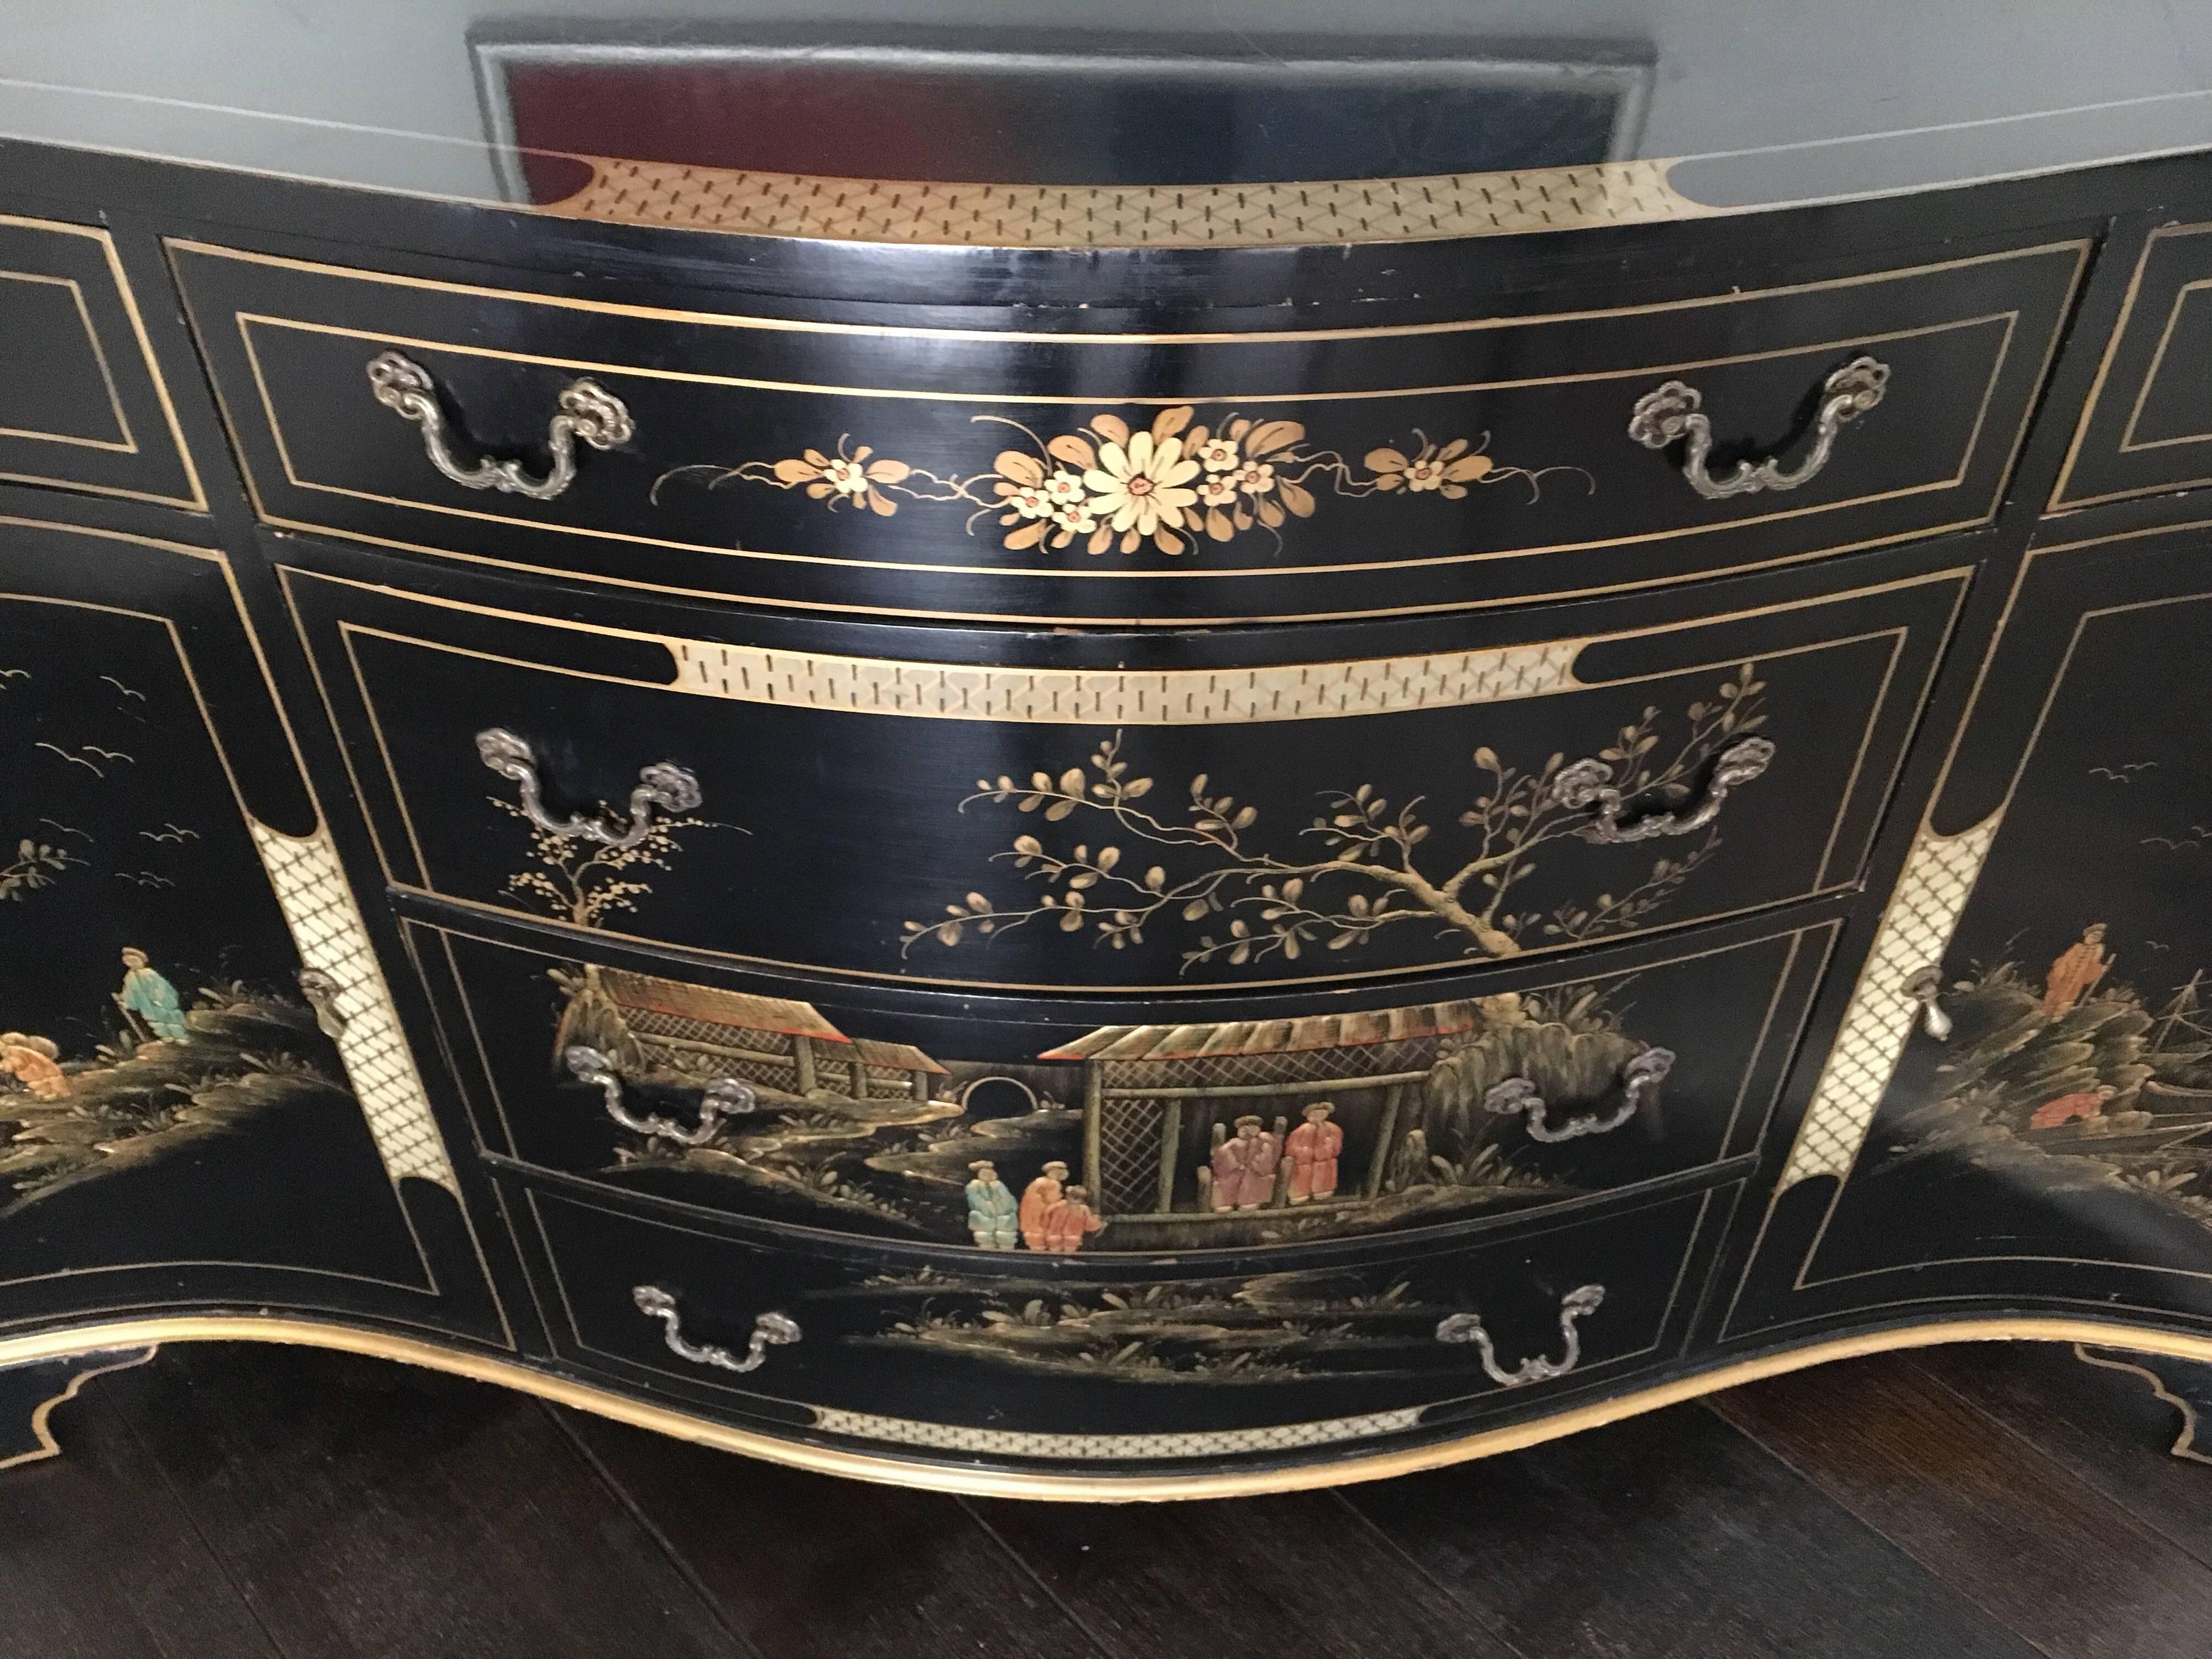 Exquisite black laquered chinoiserie server/buffet with gilt painted designs on front and sides. Has six drawers and two front doors that open to shelving. 